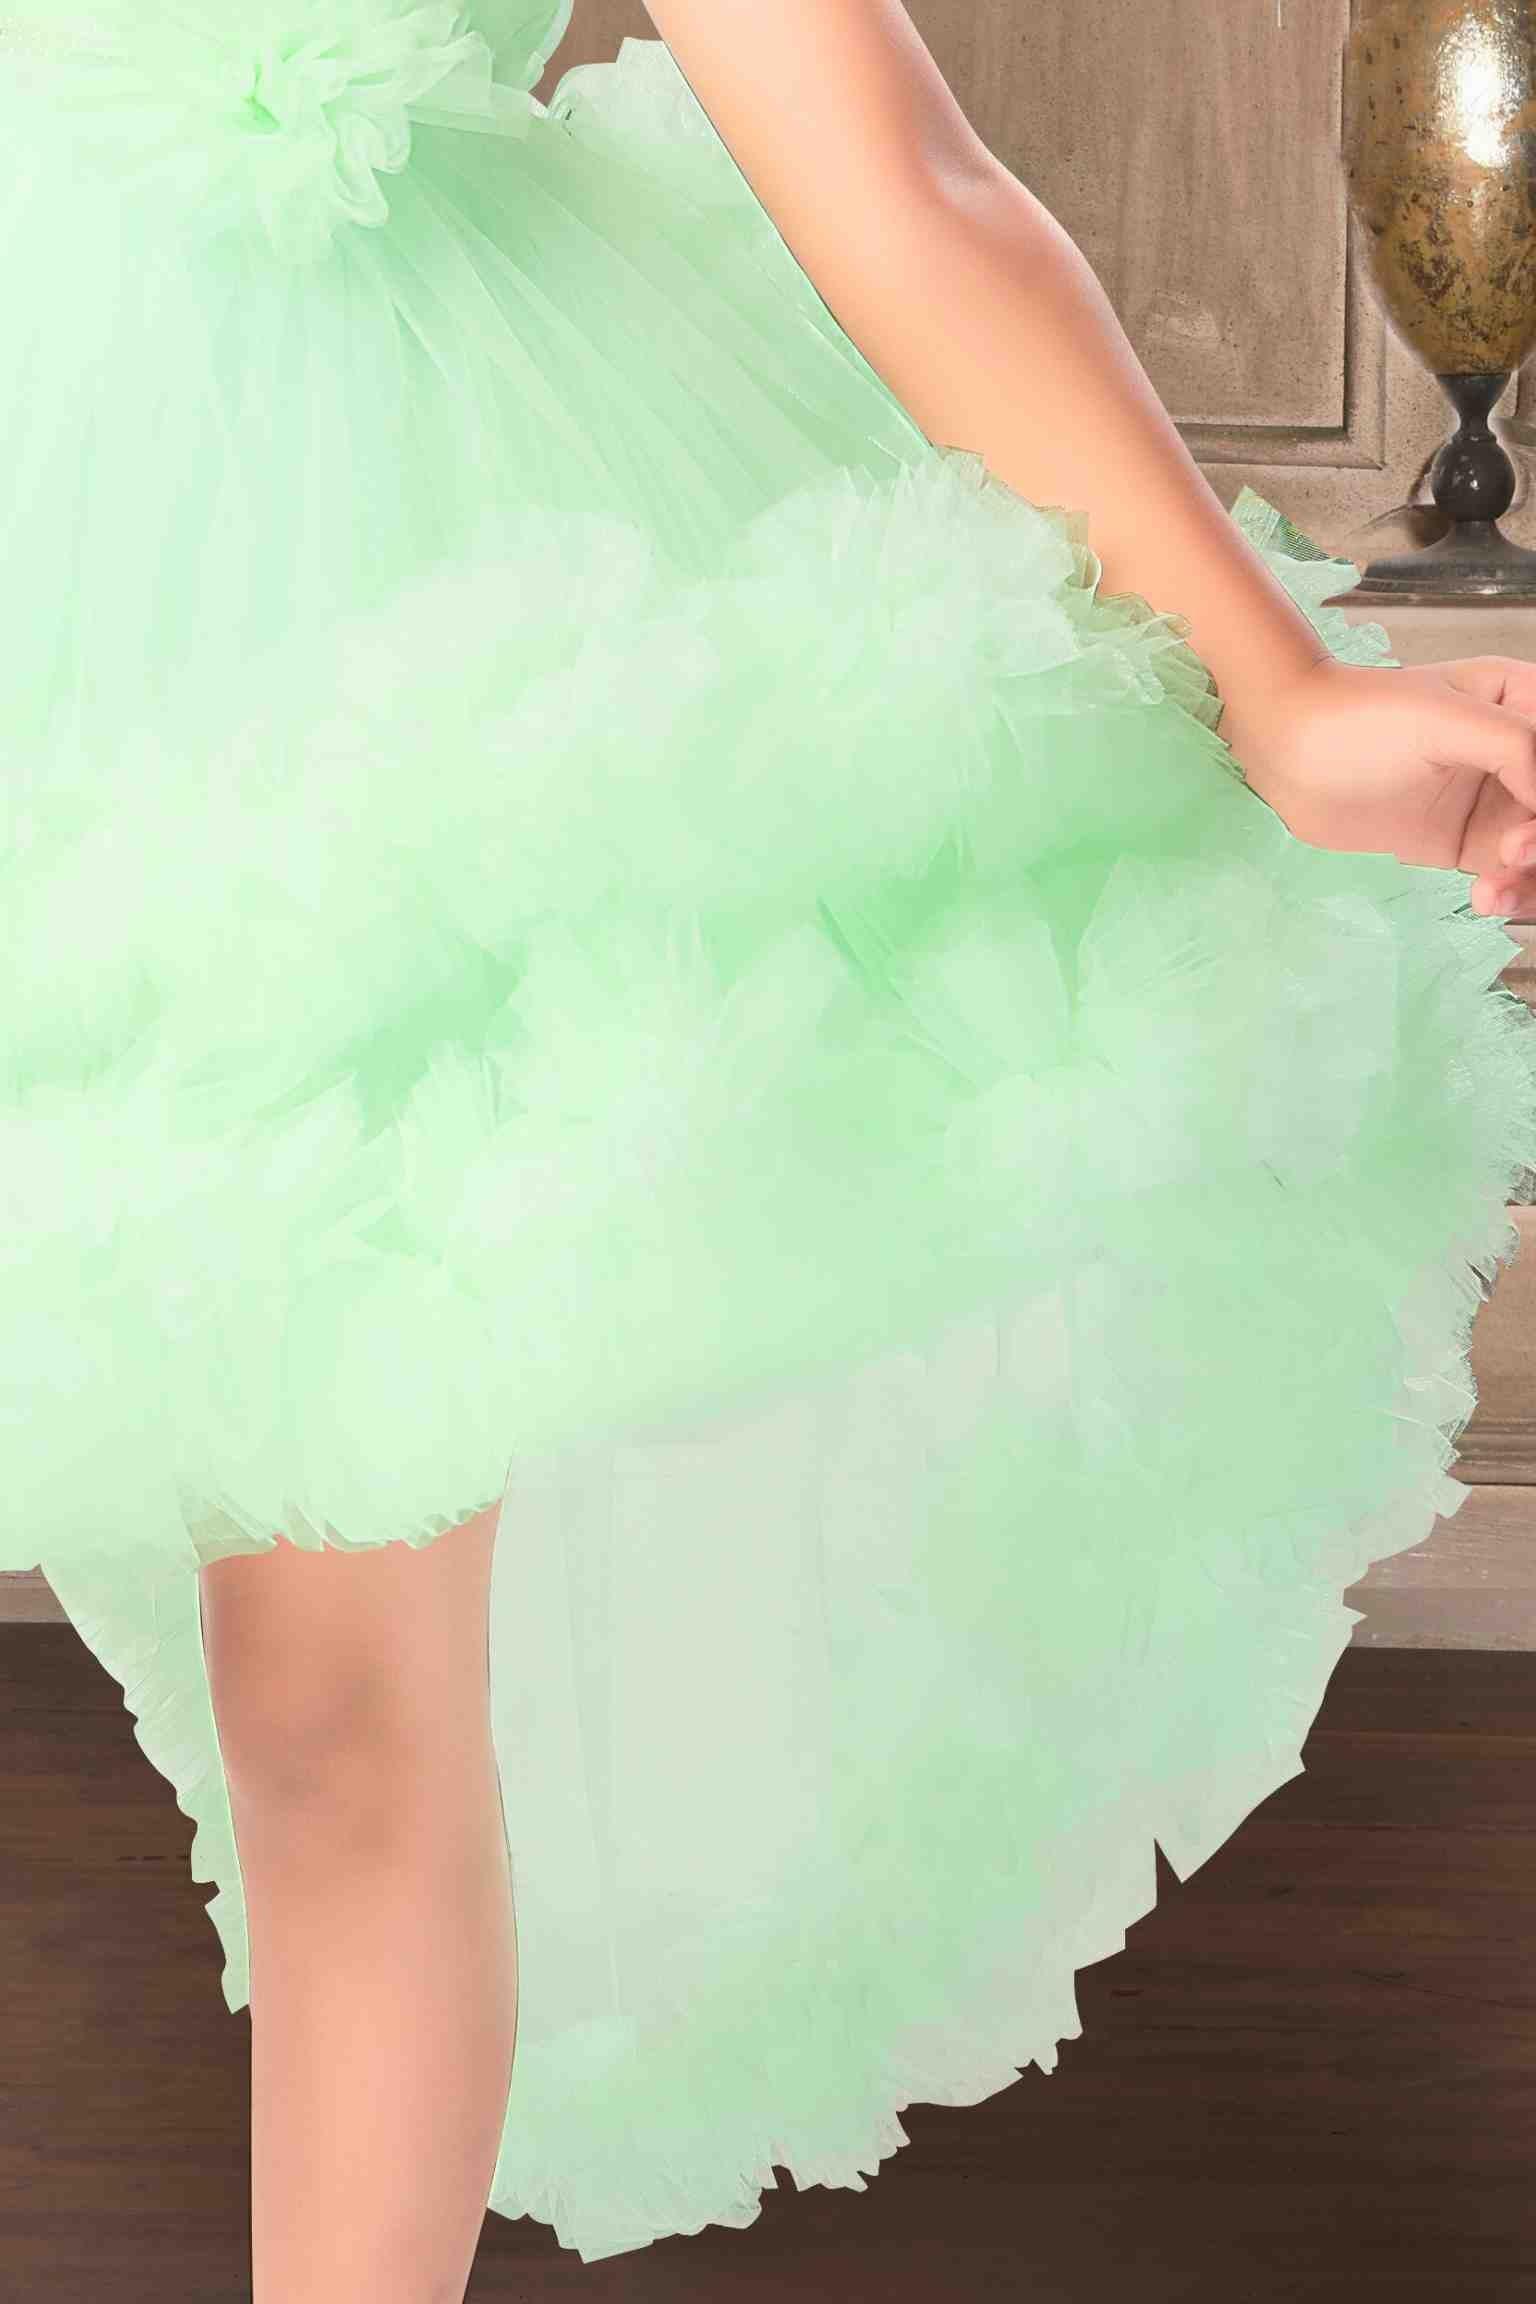 Green Net Multilayer With Ruffle Frock For Girls - Lagorii Kids